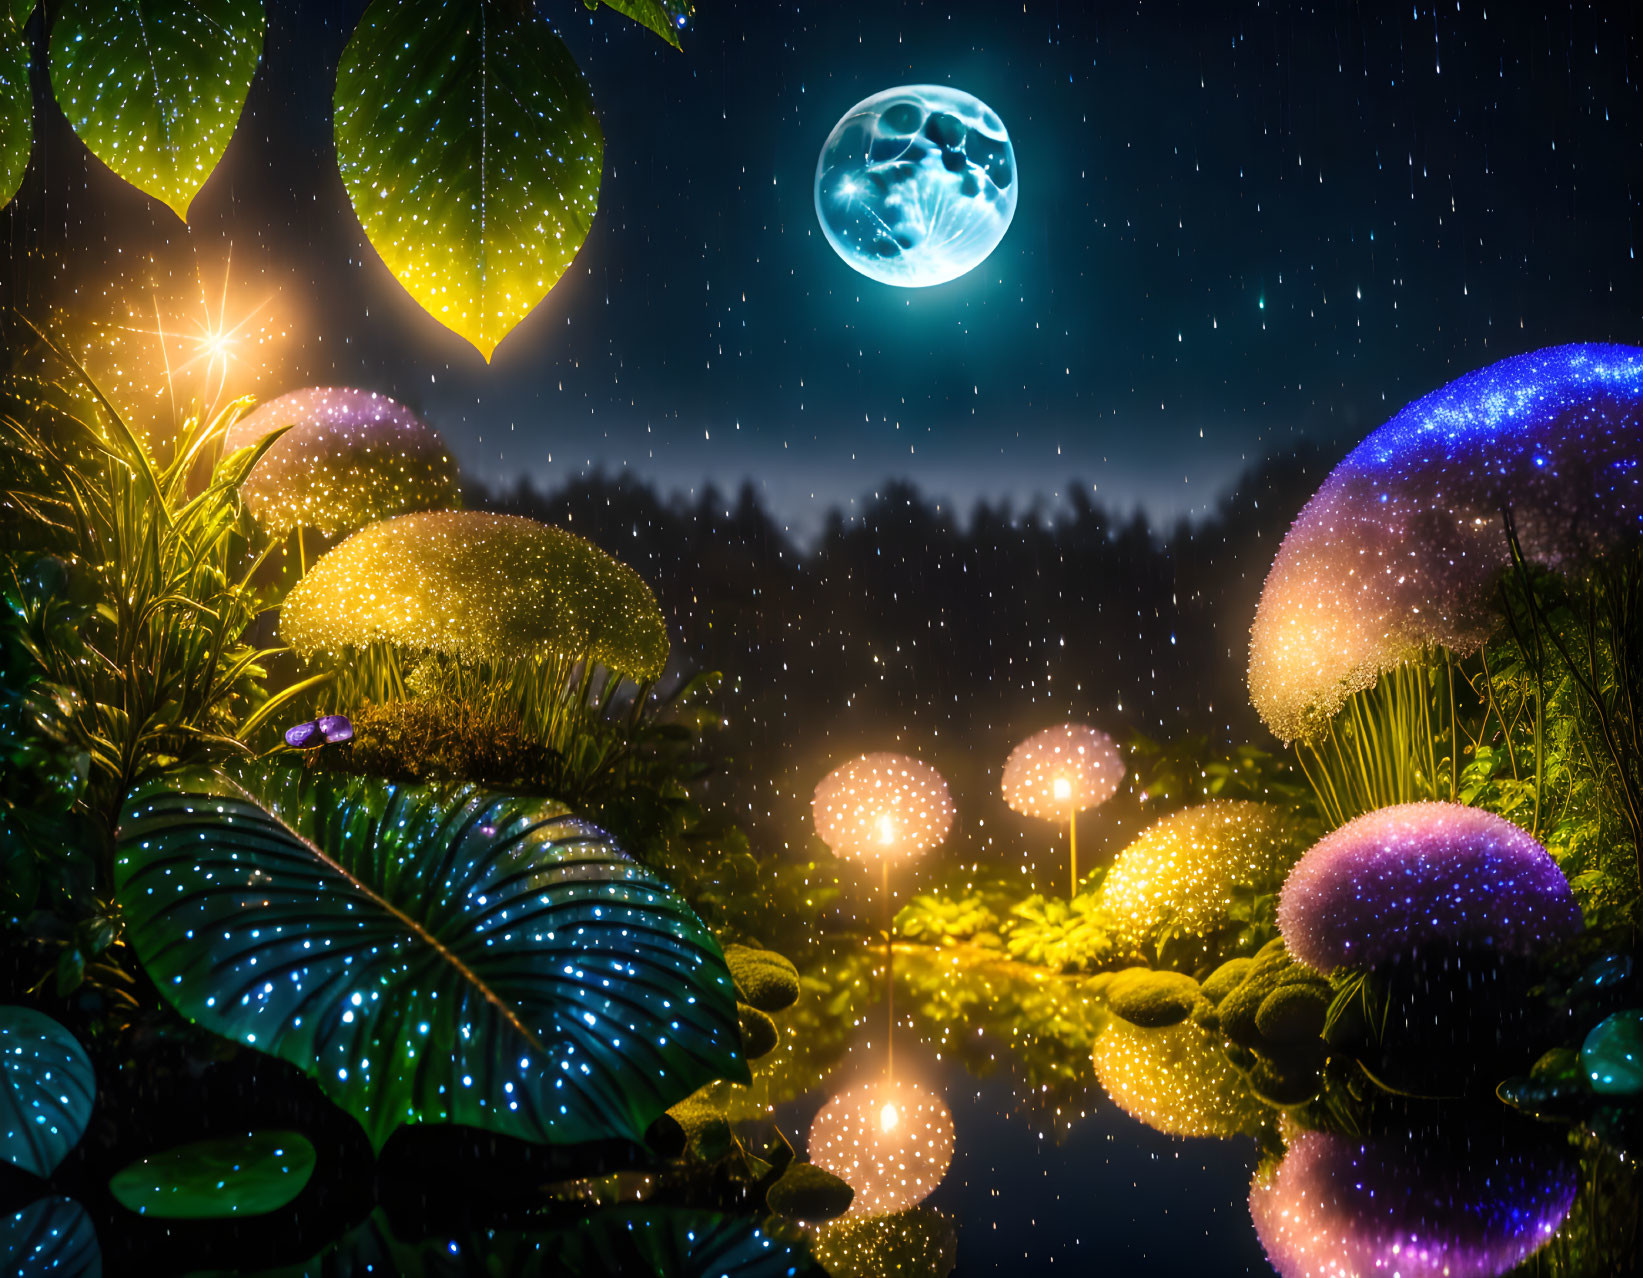 Enchanting night landscape with glowing mushrooms, leaves, and blue moon